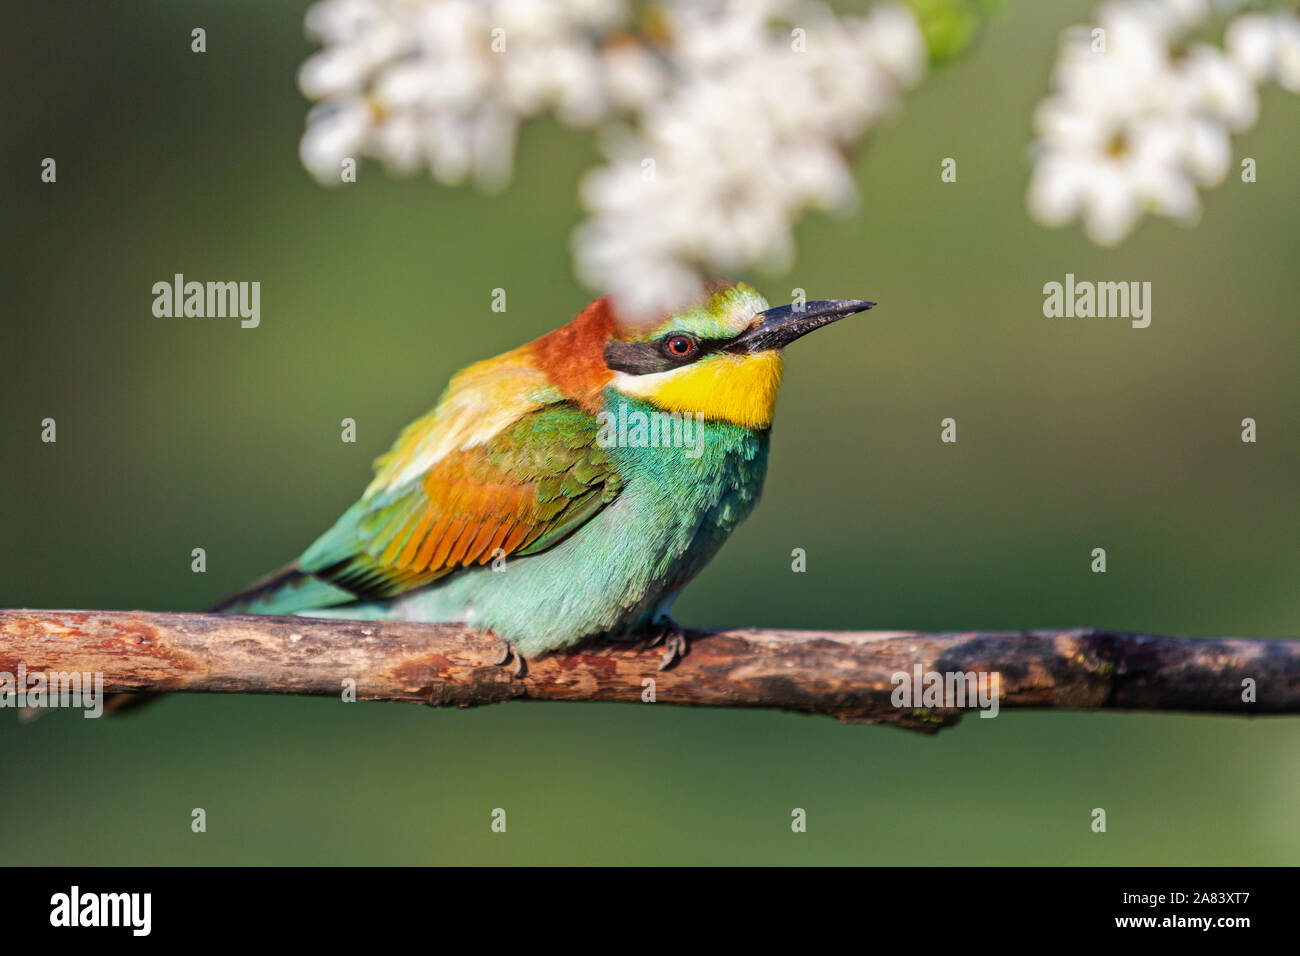 beautiful bird sits on a branch in robinia flowers Stock Photo